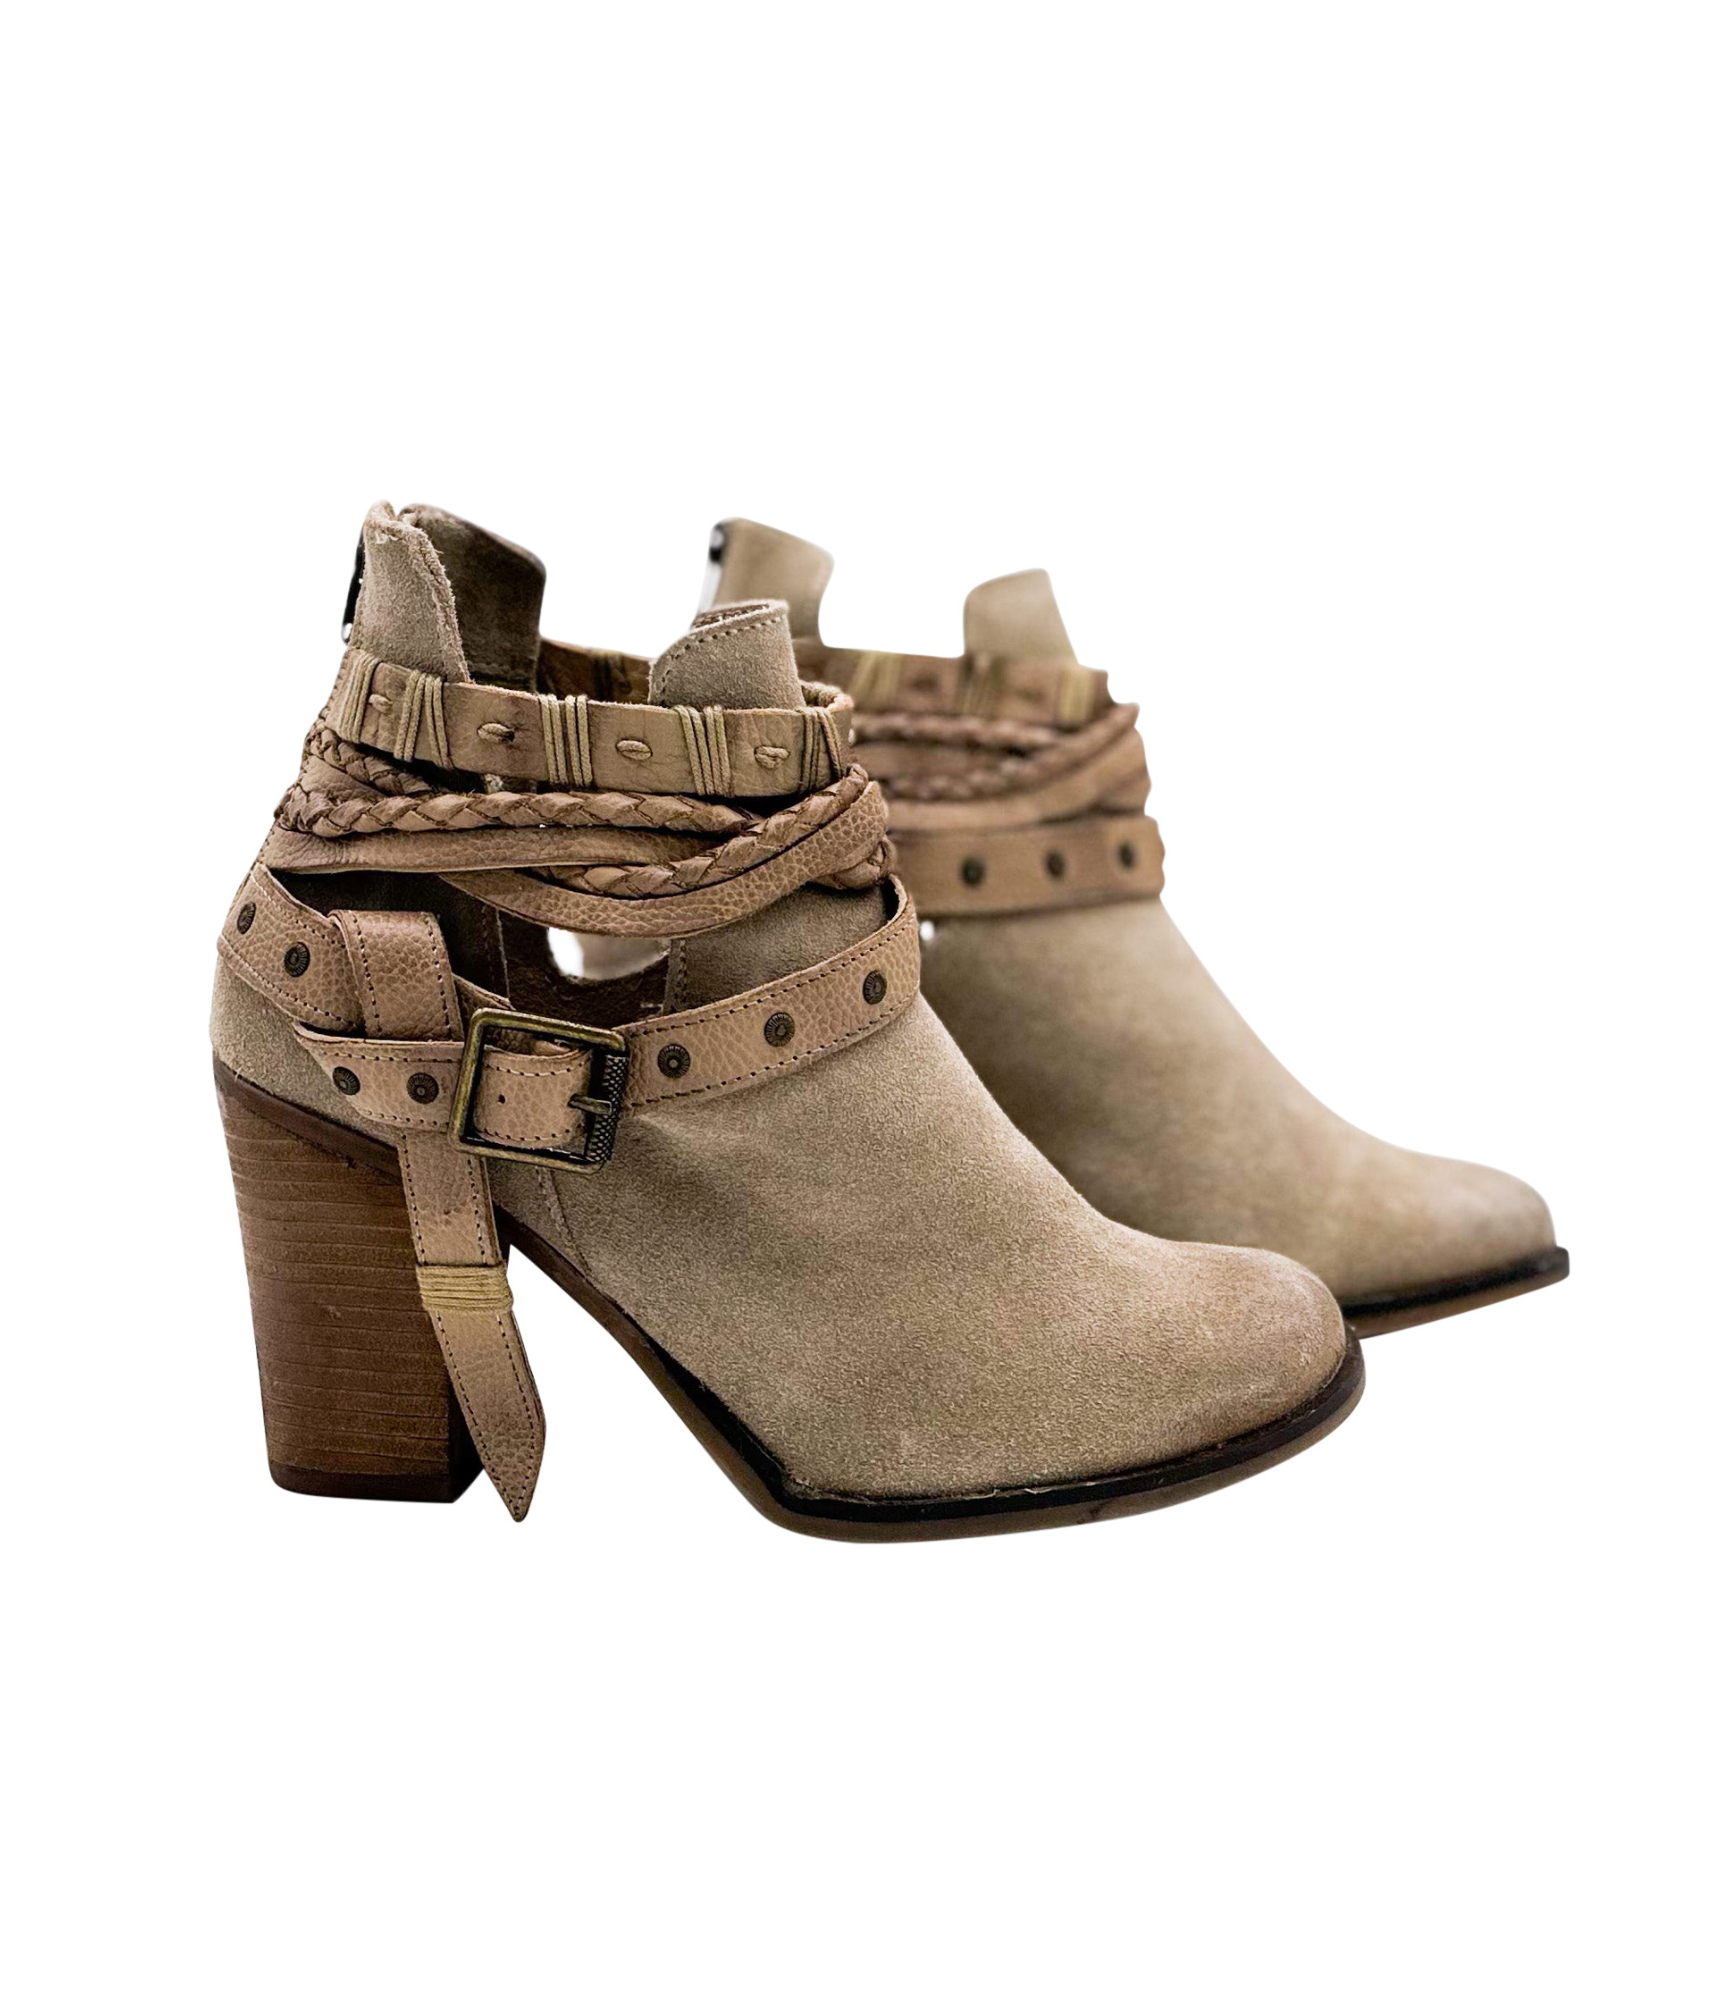 Cuthbert Booties in Taupe